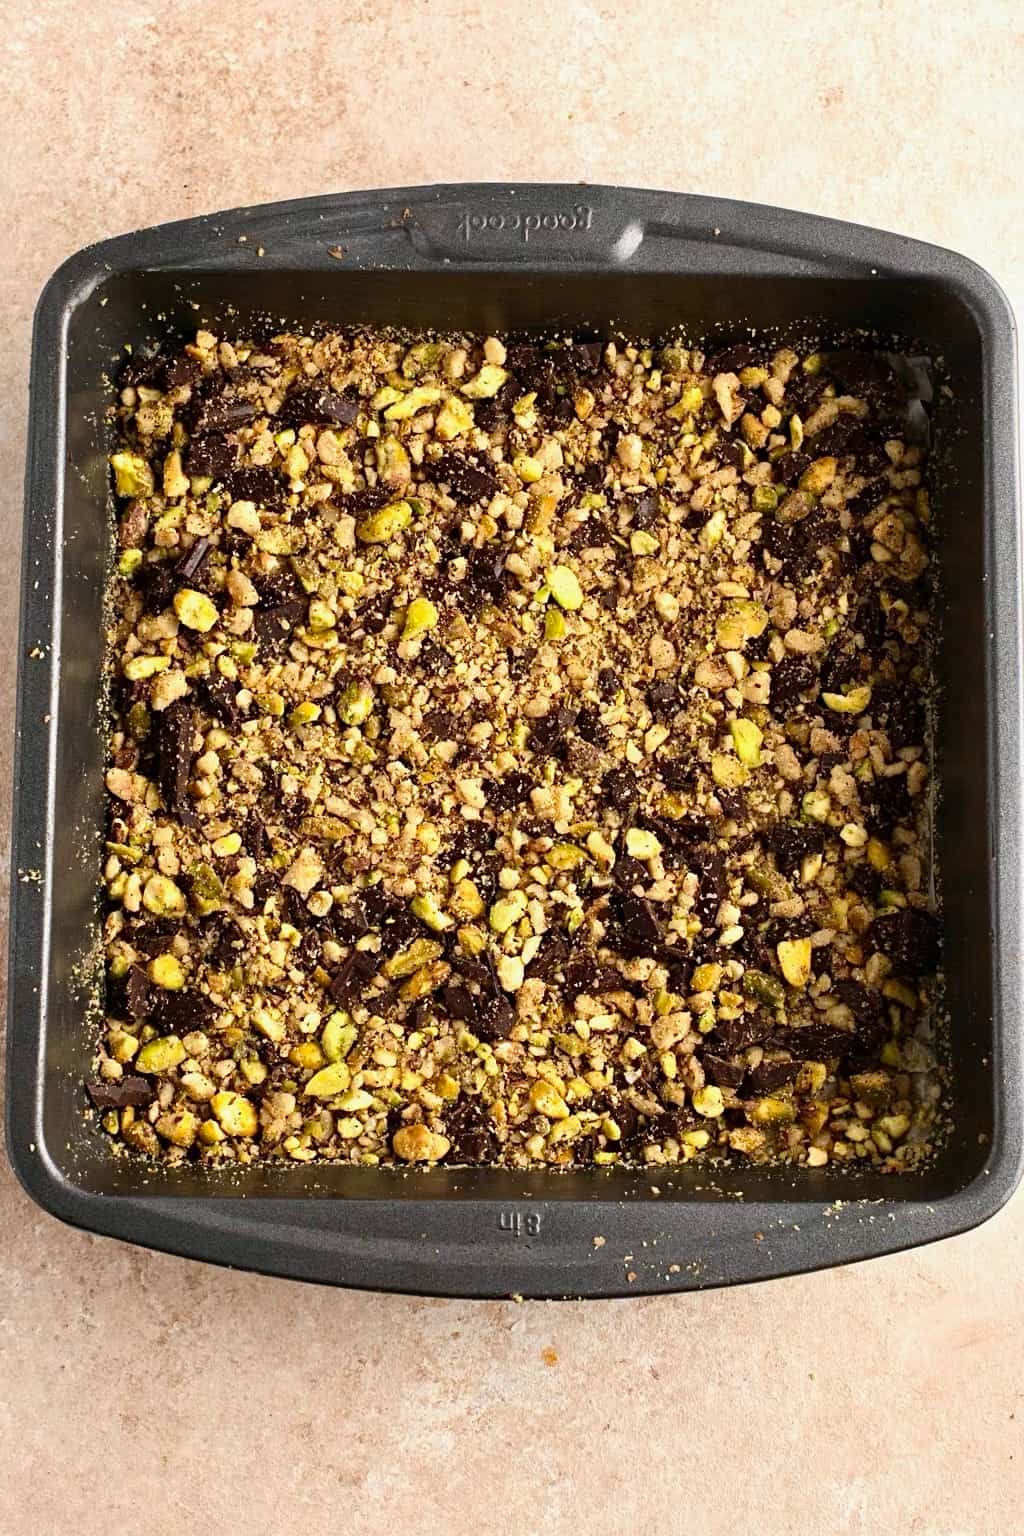 Add the chocolate nut mixture for Chocolate Baklava